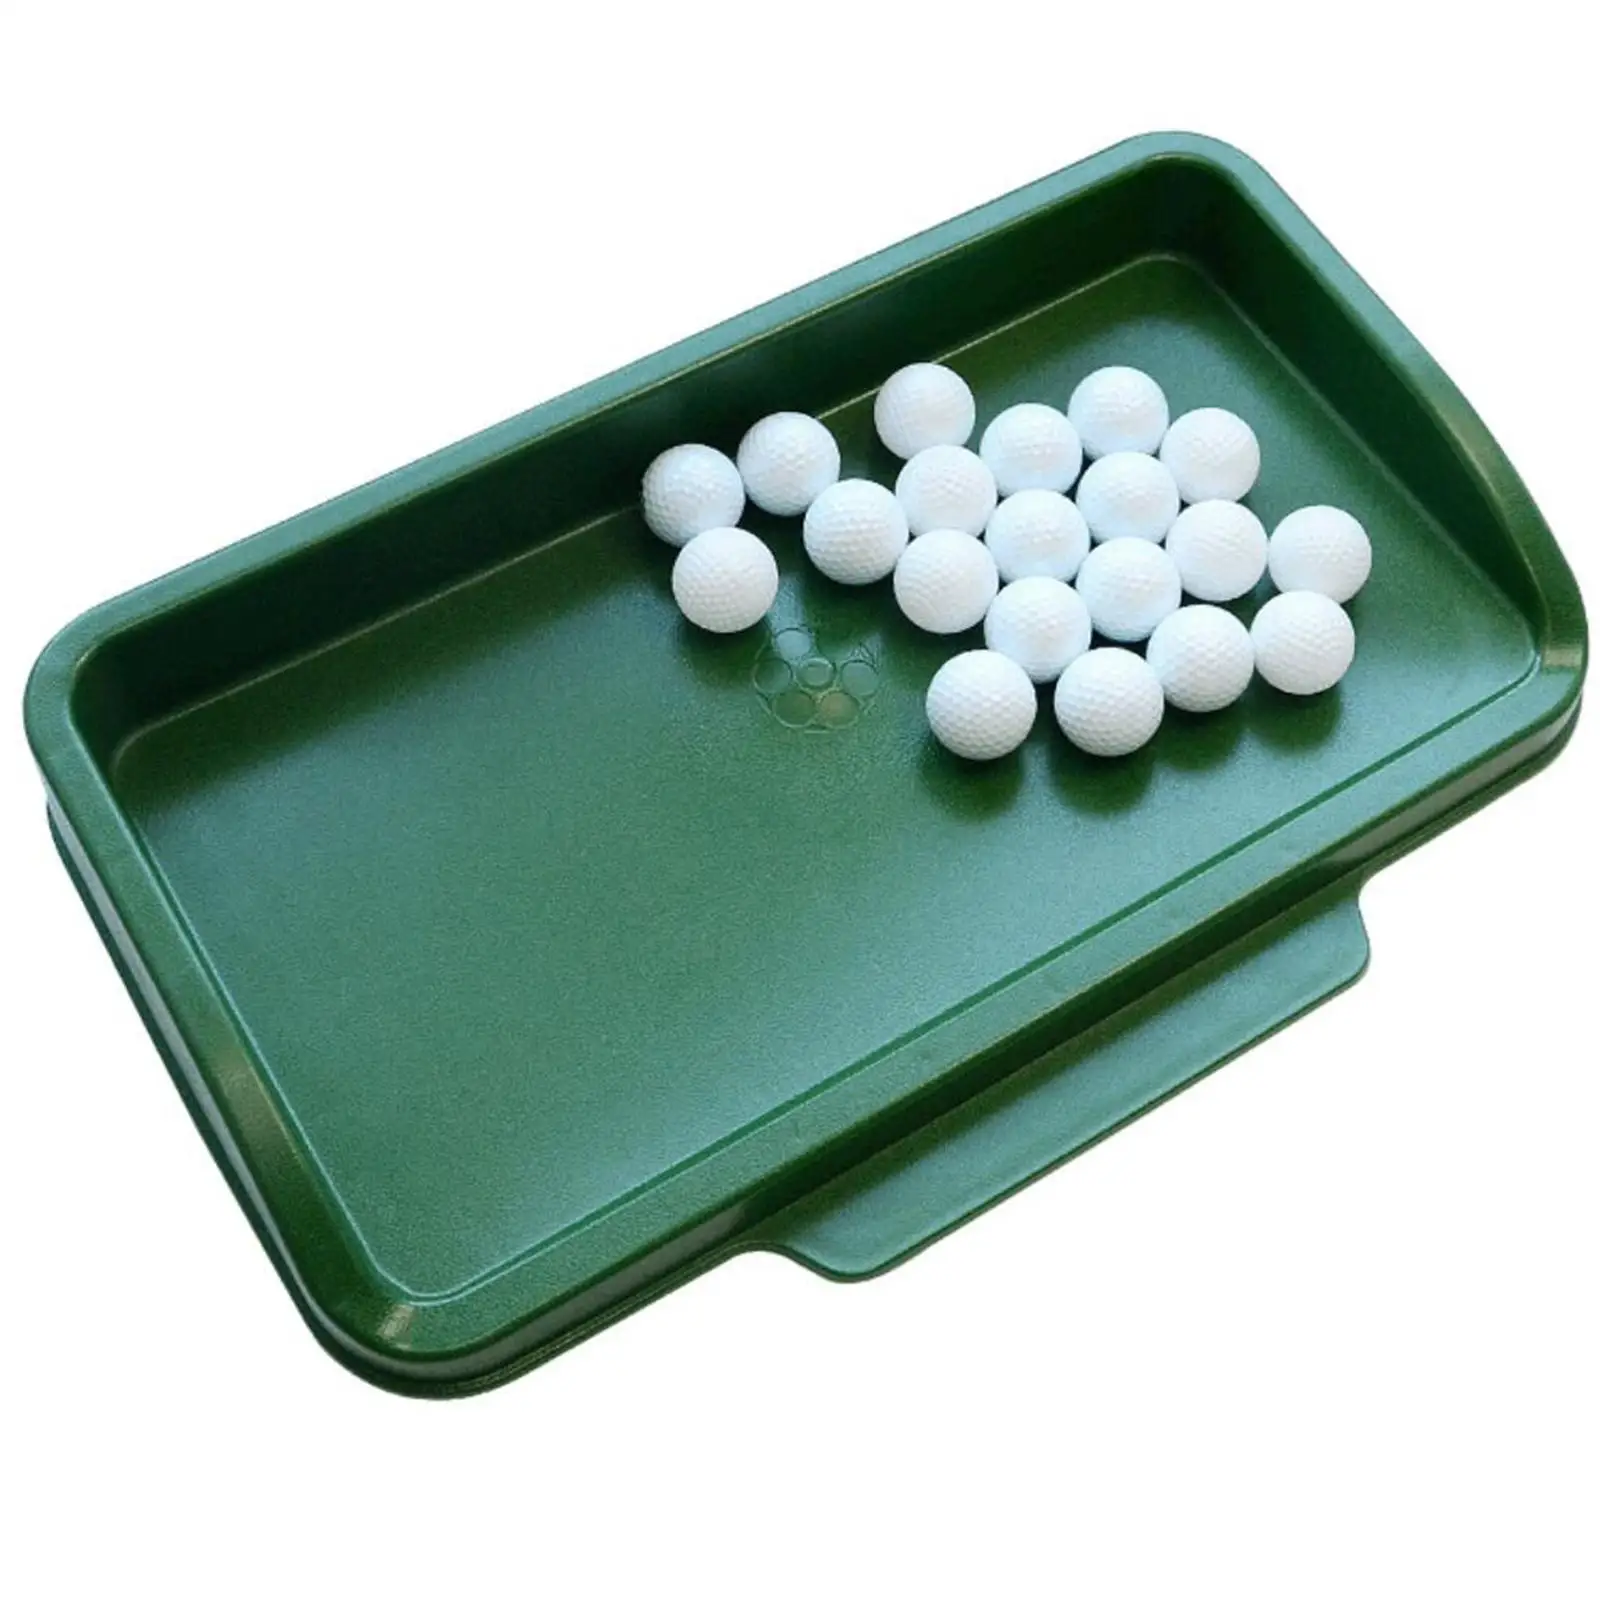 Golf Ball Tray, Golfball Storage Container Driving Range Balls Holder for Outdoor Indoor Golf Links, Golfer Gift